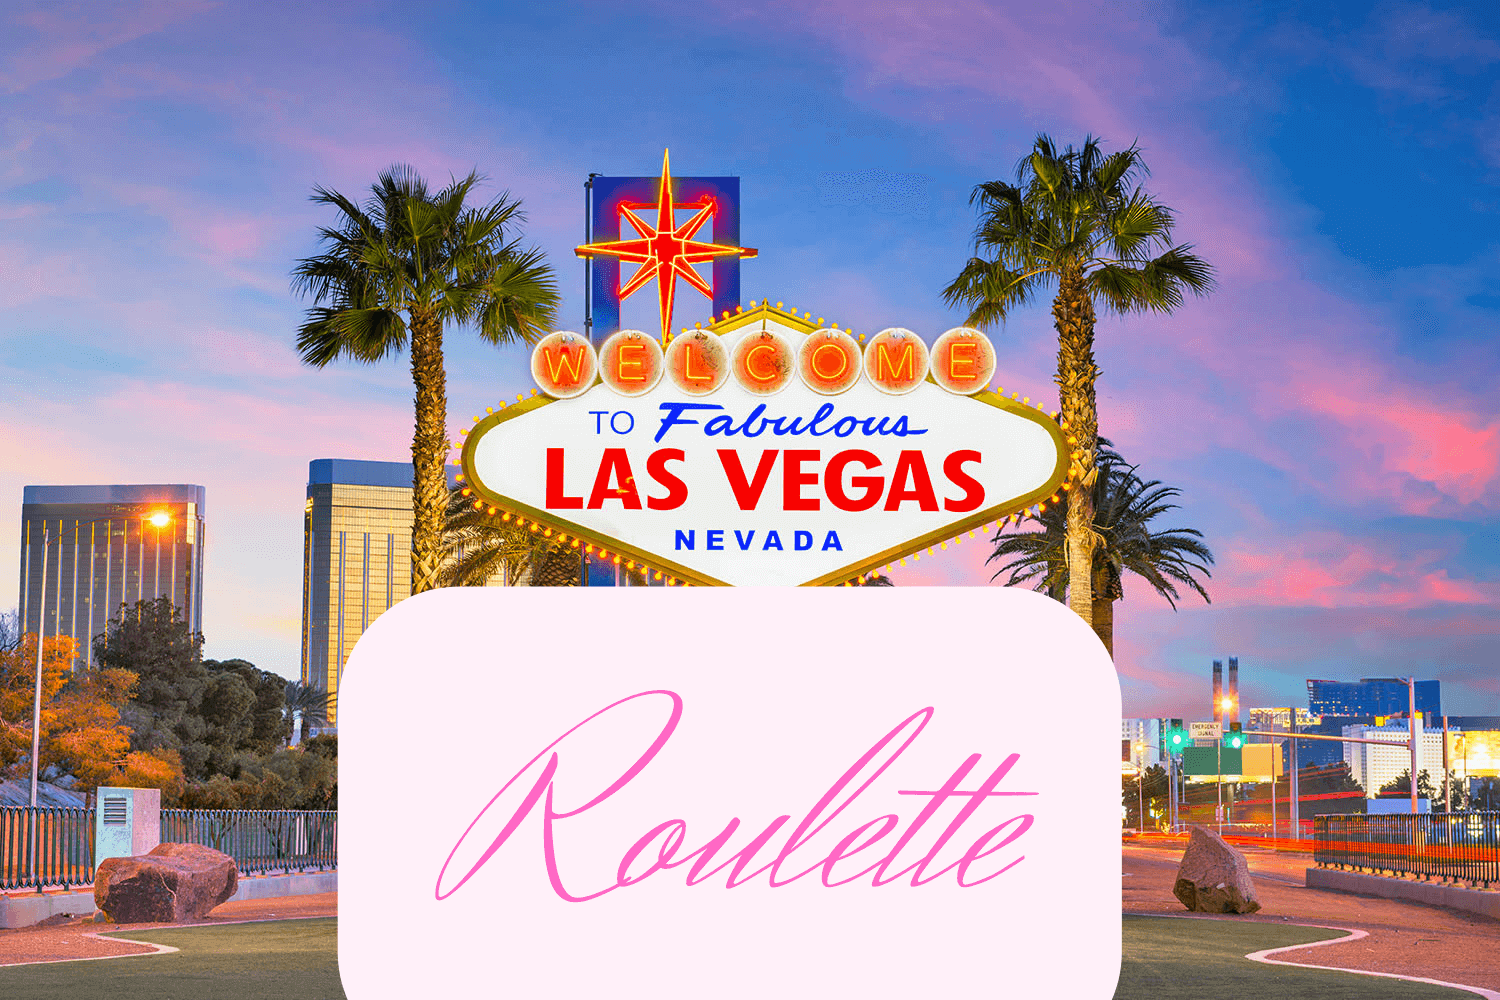 How to Play Roulette in Las Vegas